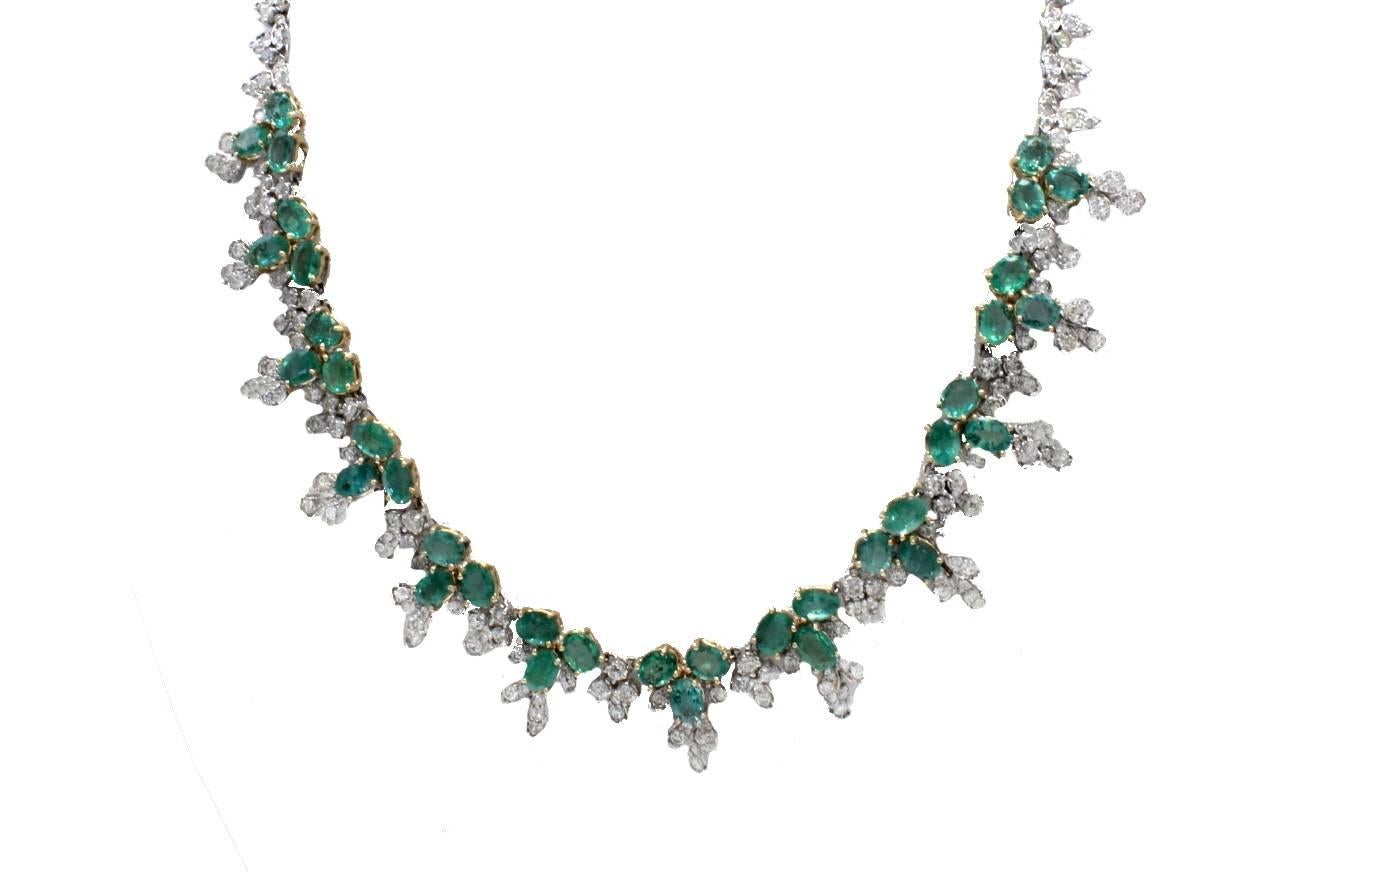 Shiny necklace in 14kt white an yellow gold covered in encrusted diamonds and emeralds.

diamonds 11.87kt
emeralds 17.36kt
tot weight 37.5gr
r.f.  ugiro